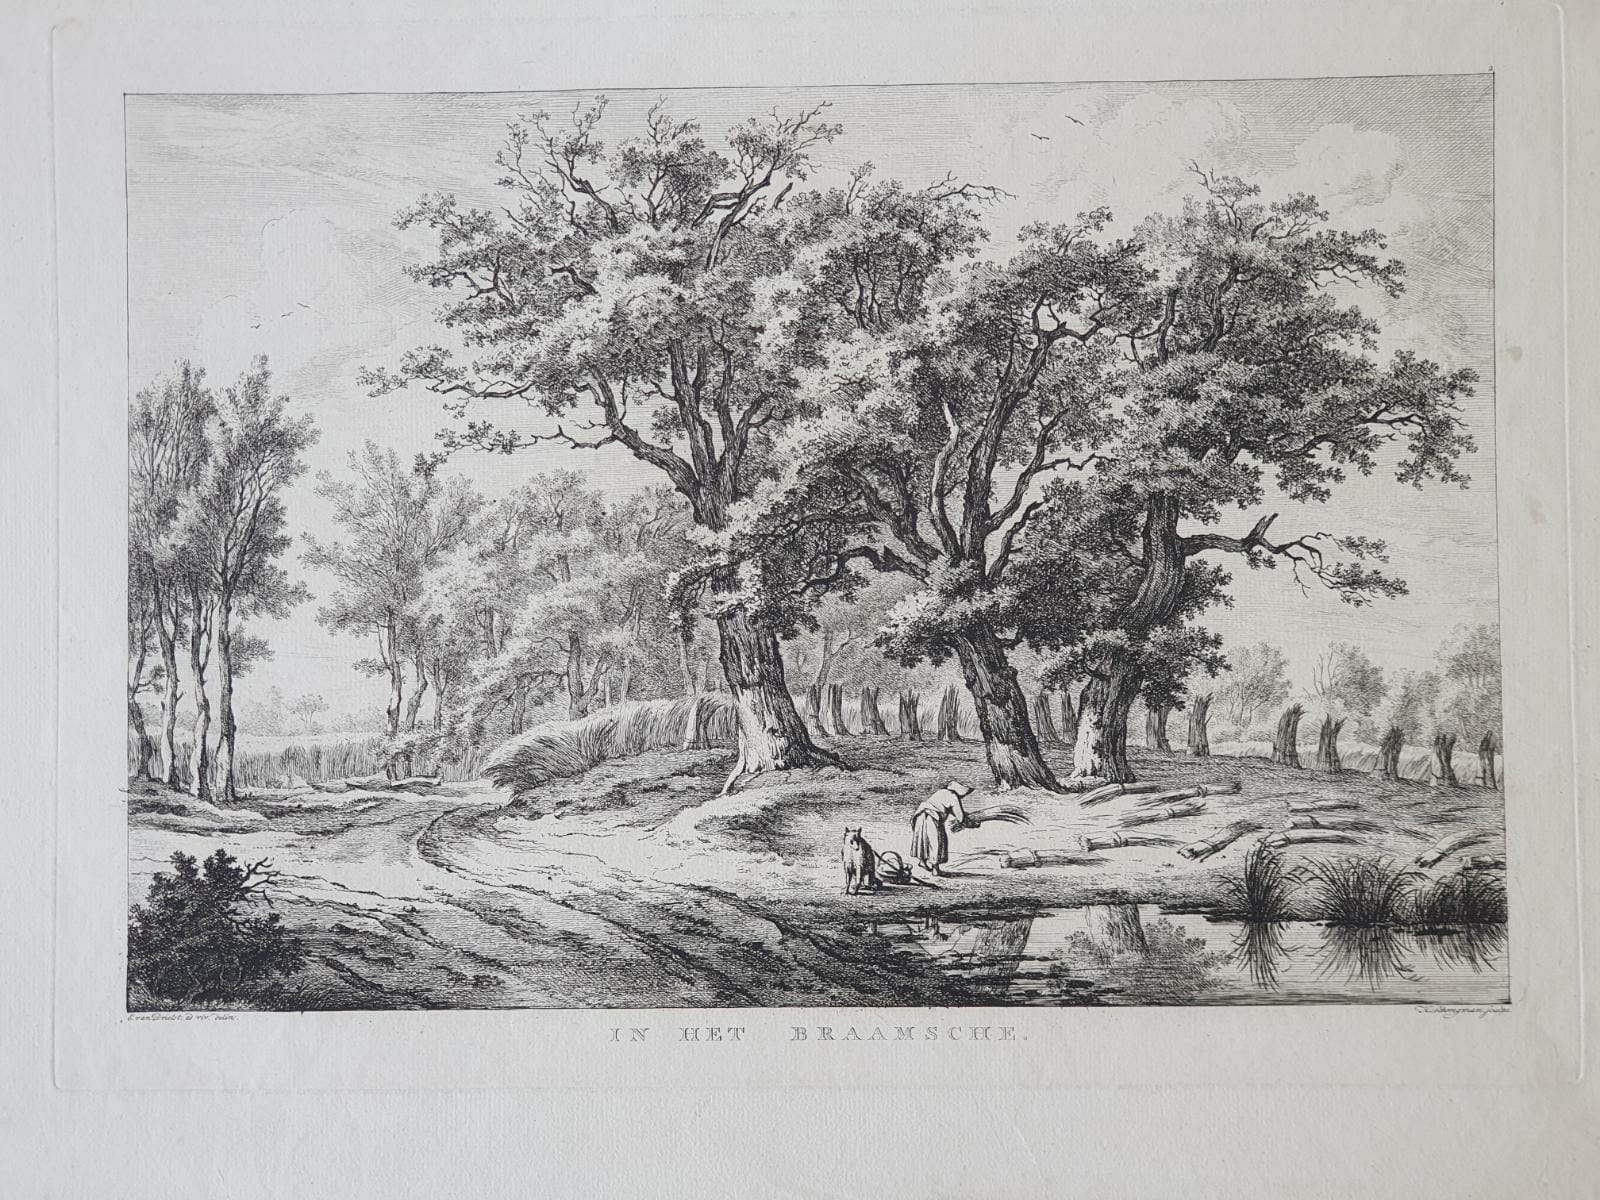 [Antique etching and engraving] E.v. Drielst, after H. Schwegman, IN HET DRAAMSCHE, published before 1800.